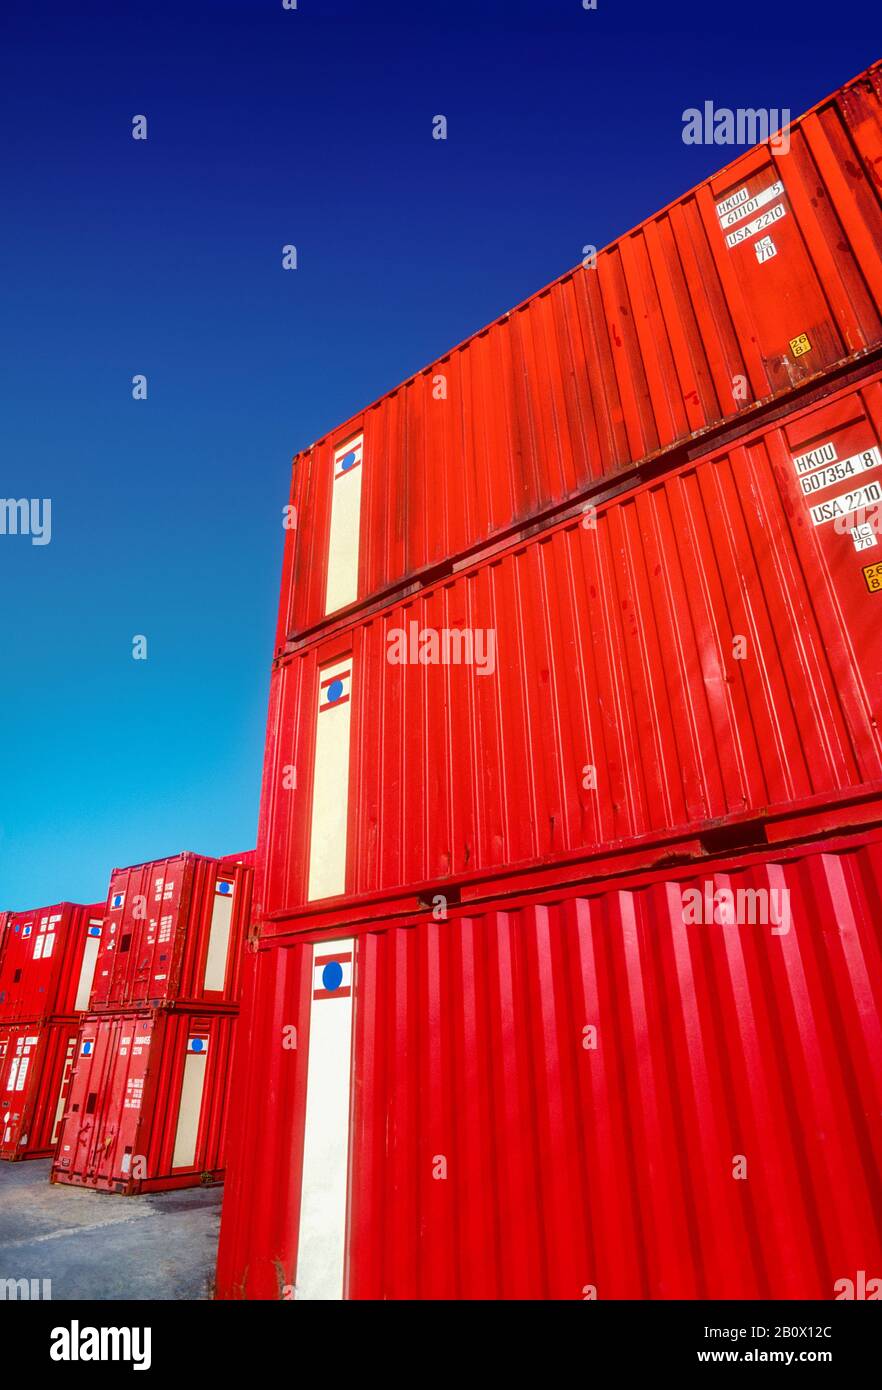 Bright red graphic shapes of containers stacked ready for shipping, Pyrmont, Sydney, New South Wales, Australia Stock Photo